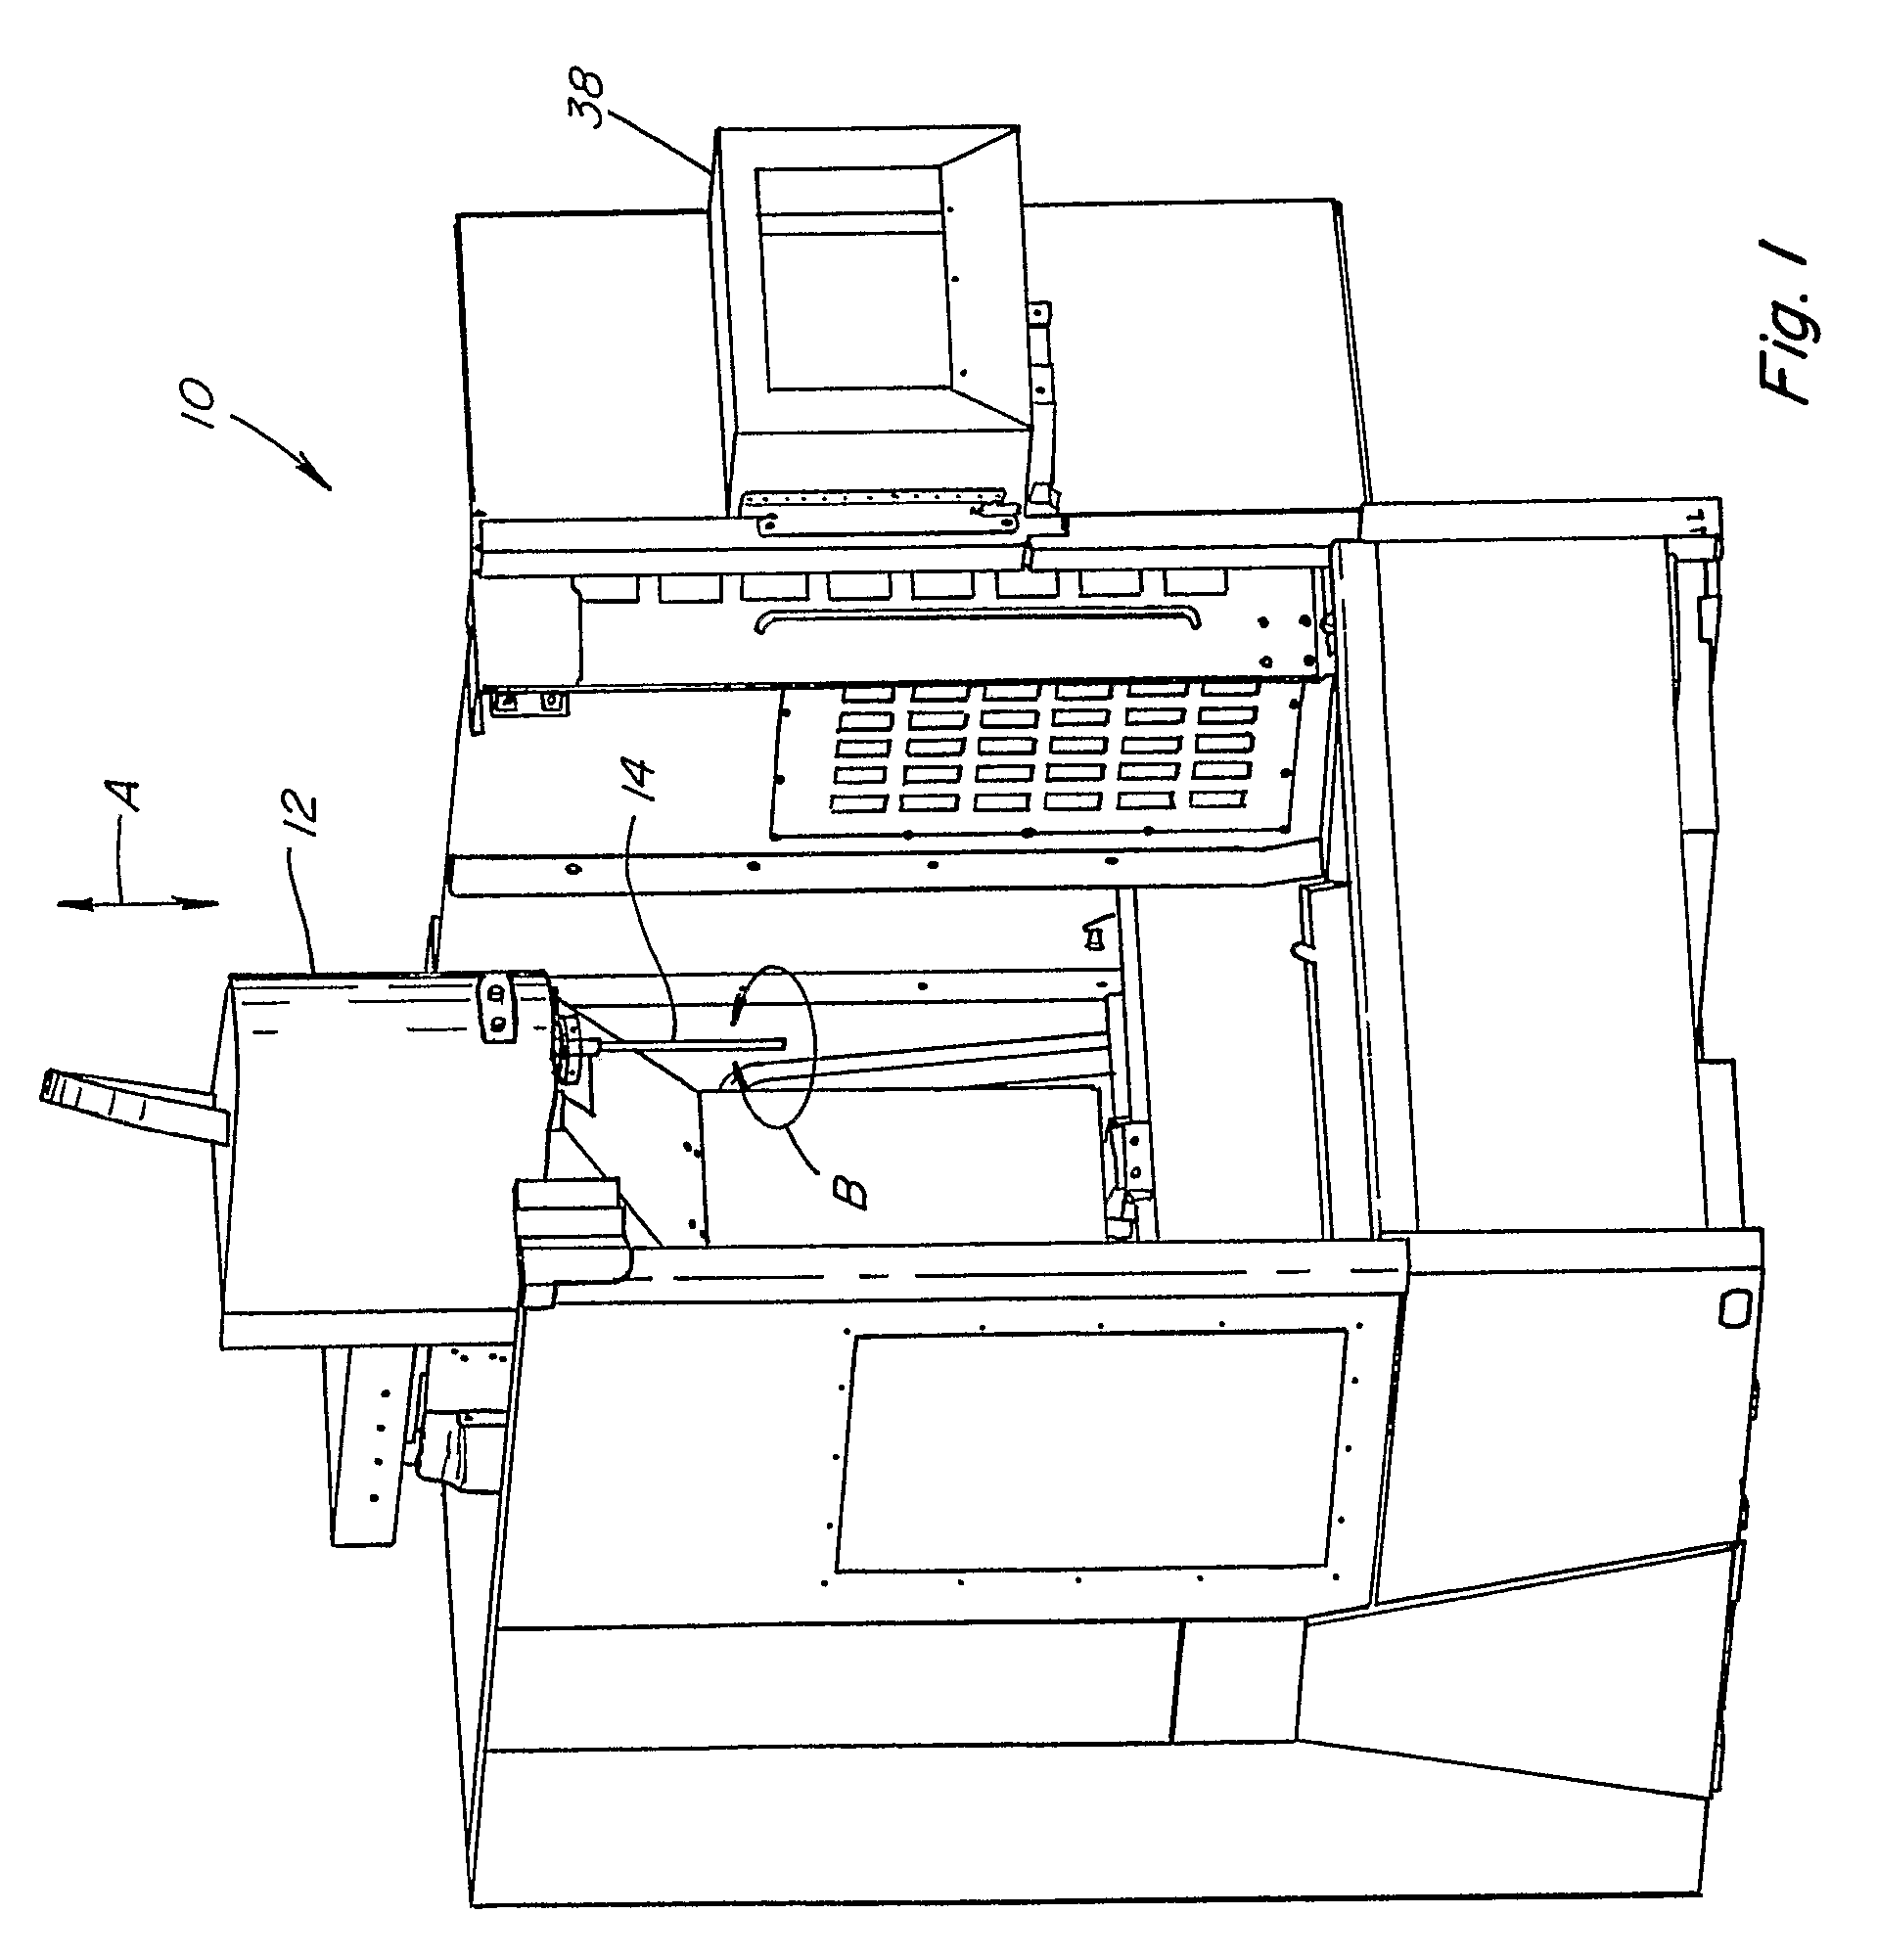 Honing feed system having full control of feed force, rate, and position and method of operation of the same